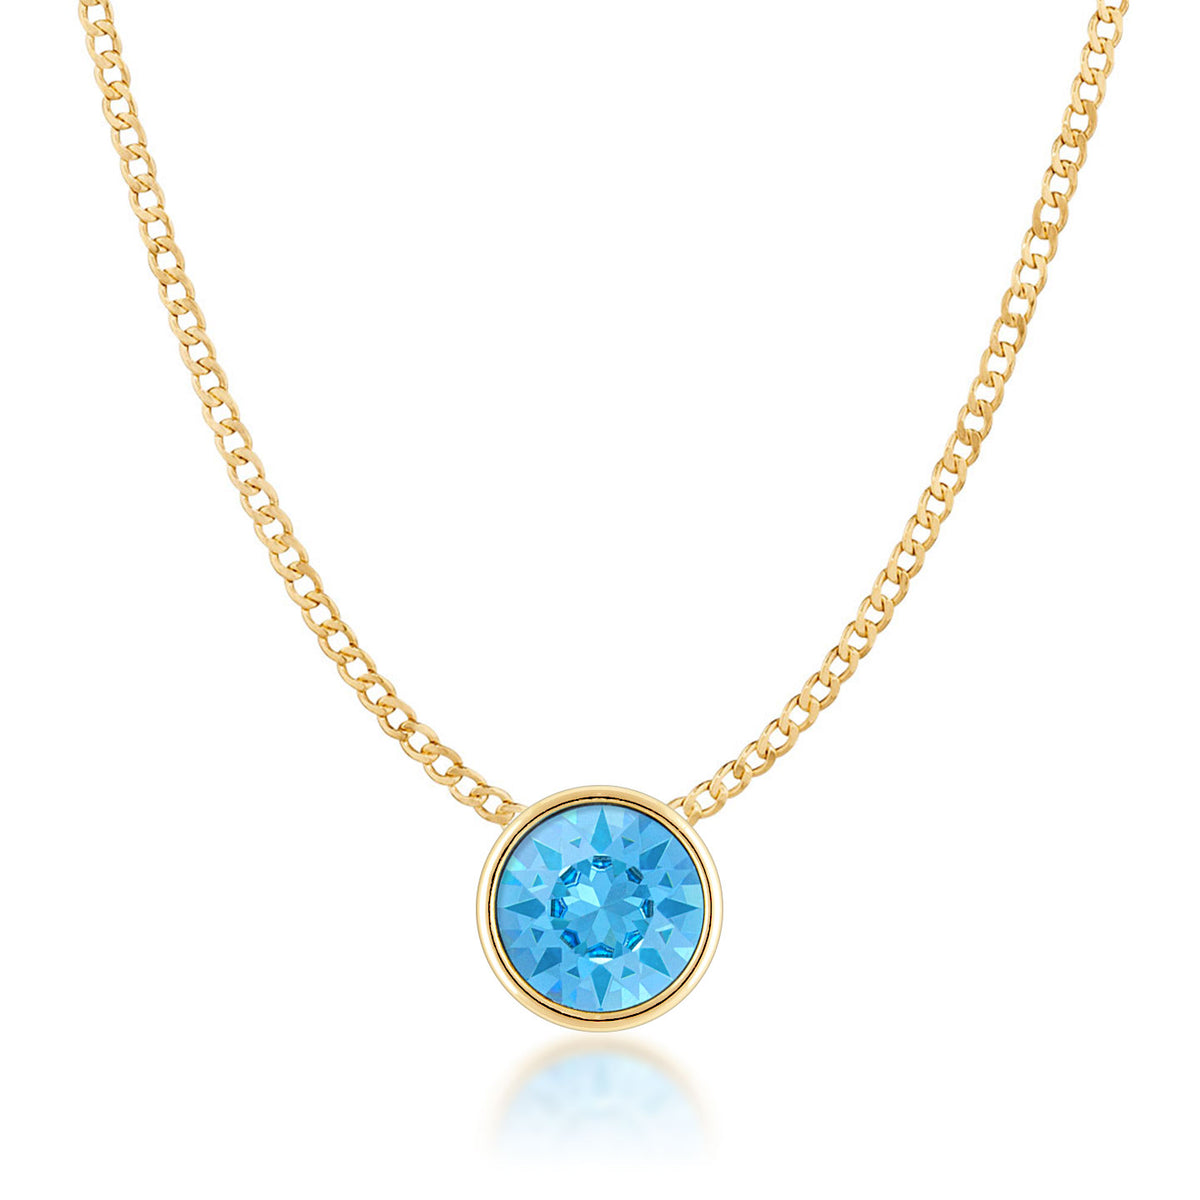 Harley Small Pendant Necklace with Blue Aquamarine Round Crystals from Swarovski Gold Plated - Ed Heart